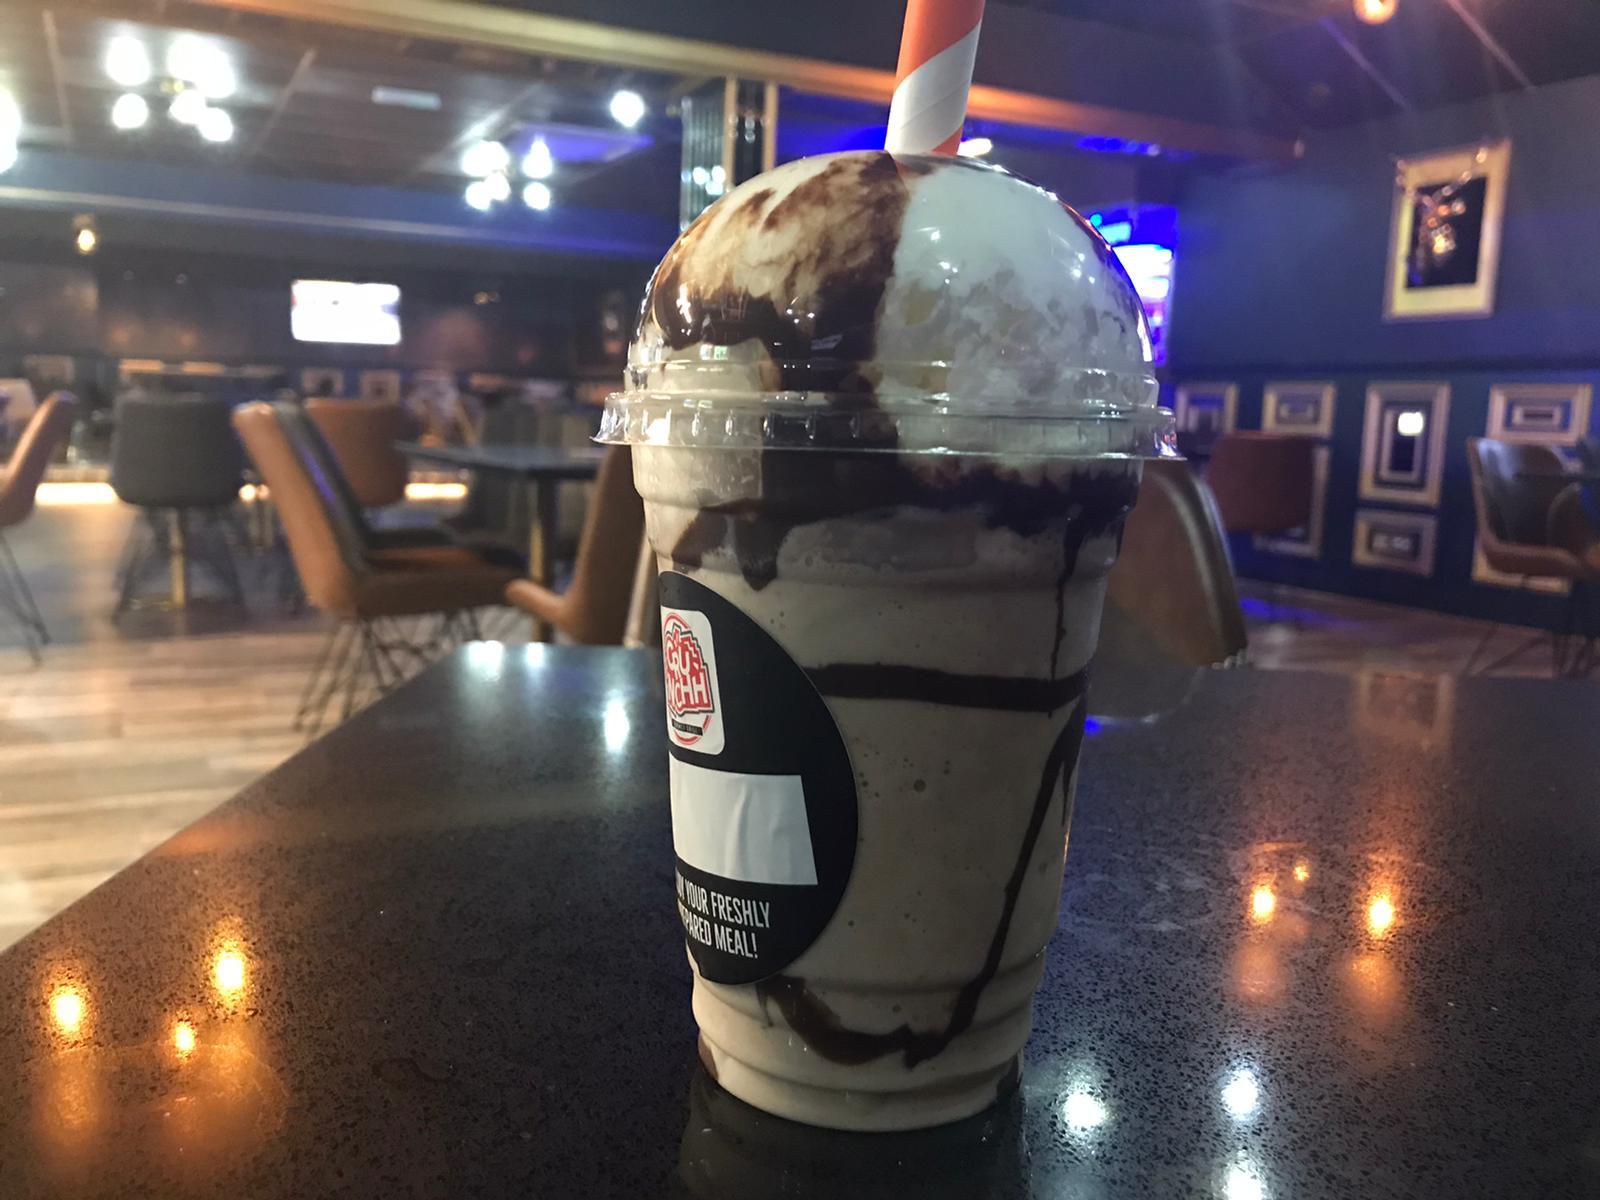 The milkshake - one to recommend